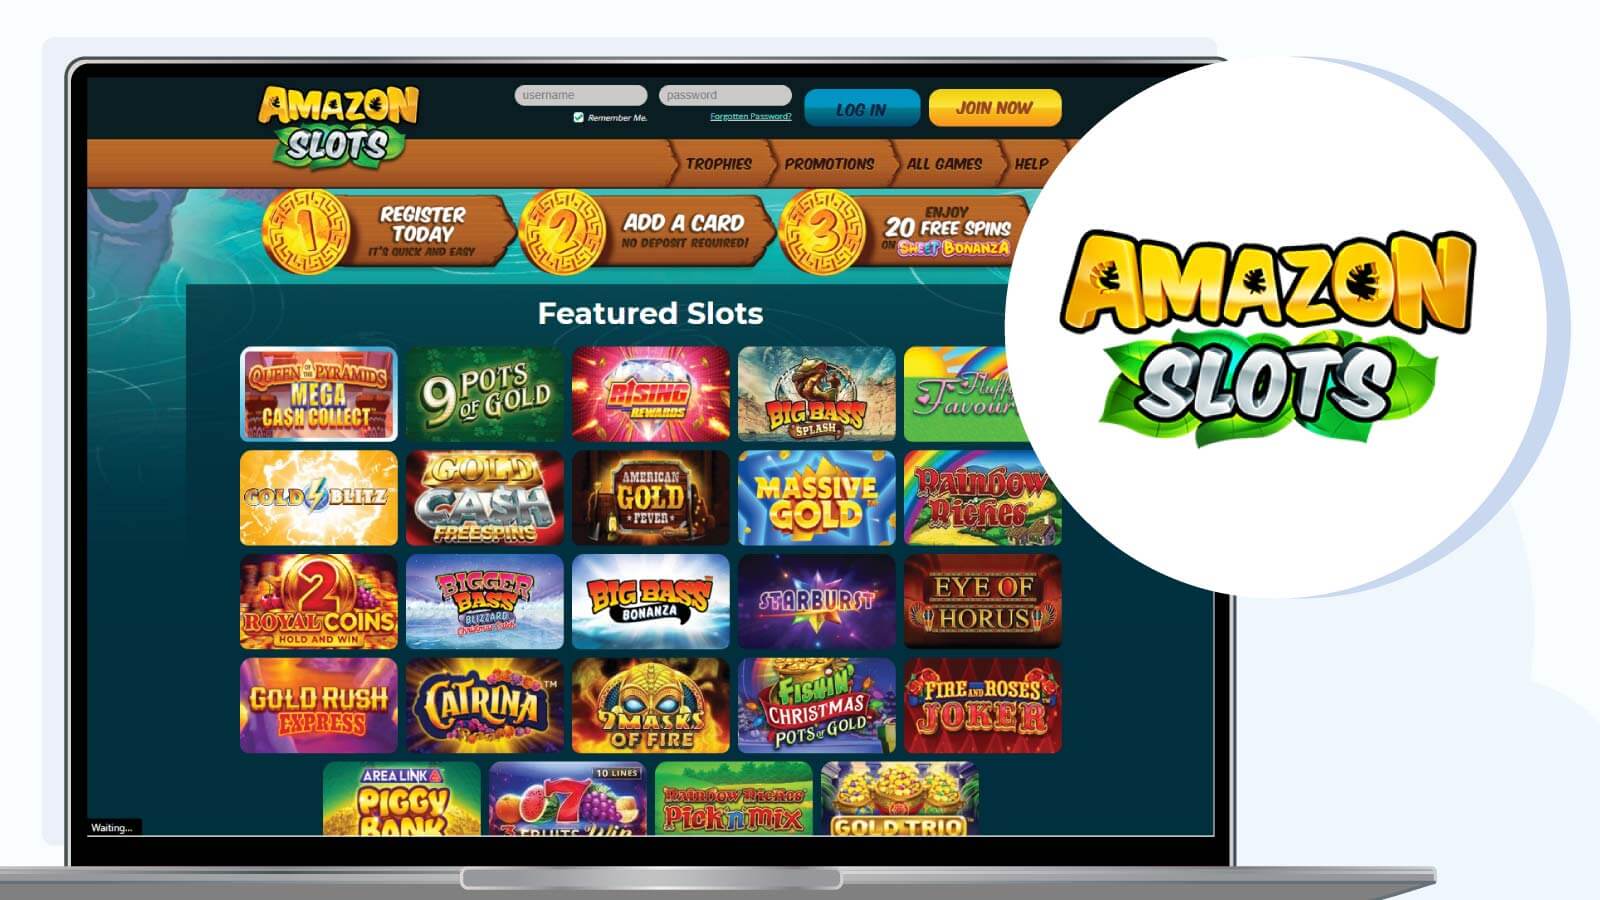 Amazon Slots – Biggest Number of Microgaming Slot Games